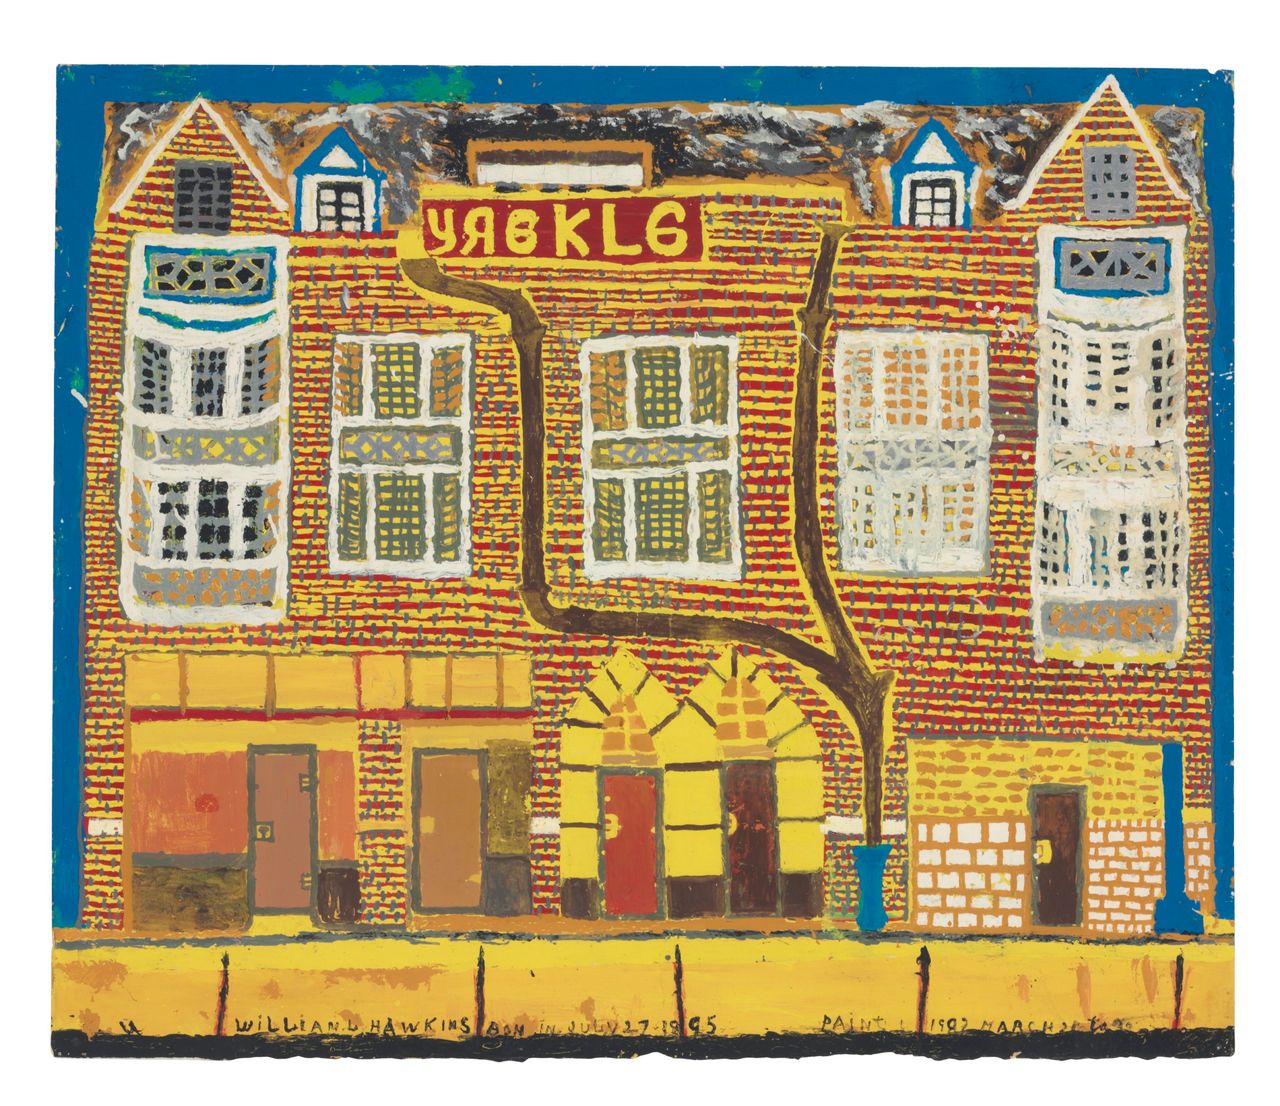 This is one of approximately five large-scale enamel-on-paper works completed by William Hawkins. The artist rendered three variations of the Yaekle building, a Columbus, Ohio landmark, one of which is a promised gift to the Philadelphia Museum of Art.